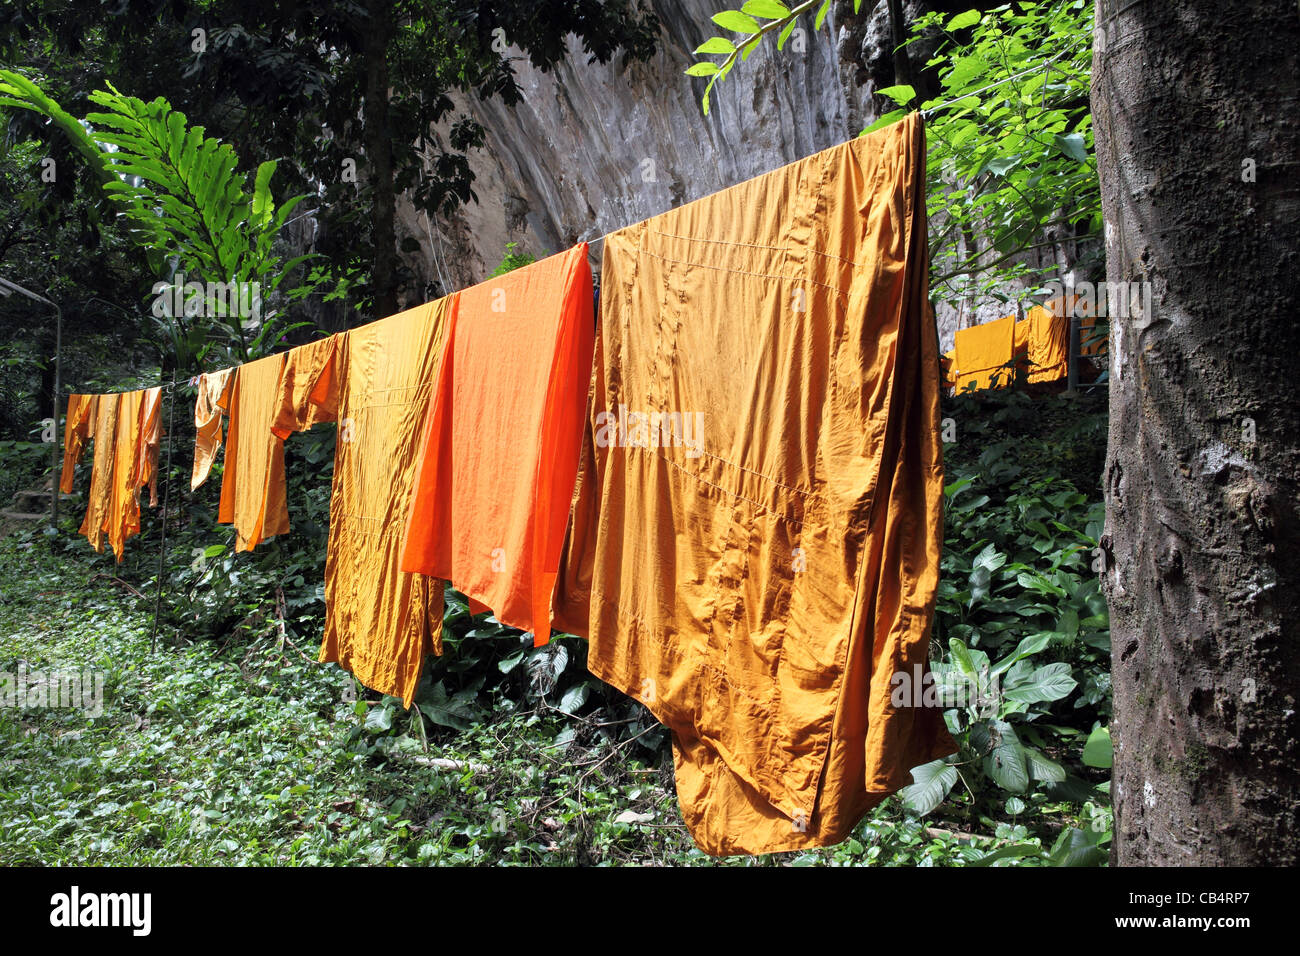 Monks robes drying on washing line at Wat Tham Seua (Tiger Cave) temple. Krabi, Thailand, South-East Asia, Asia Stock Photo